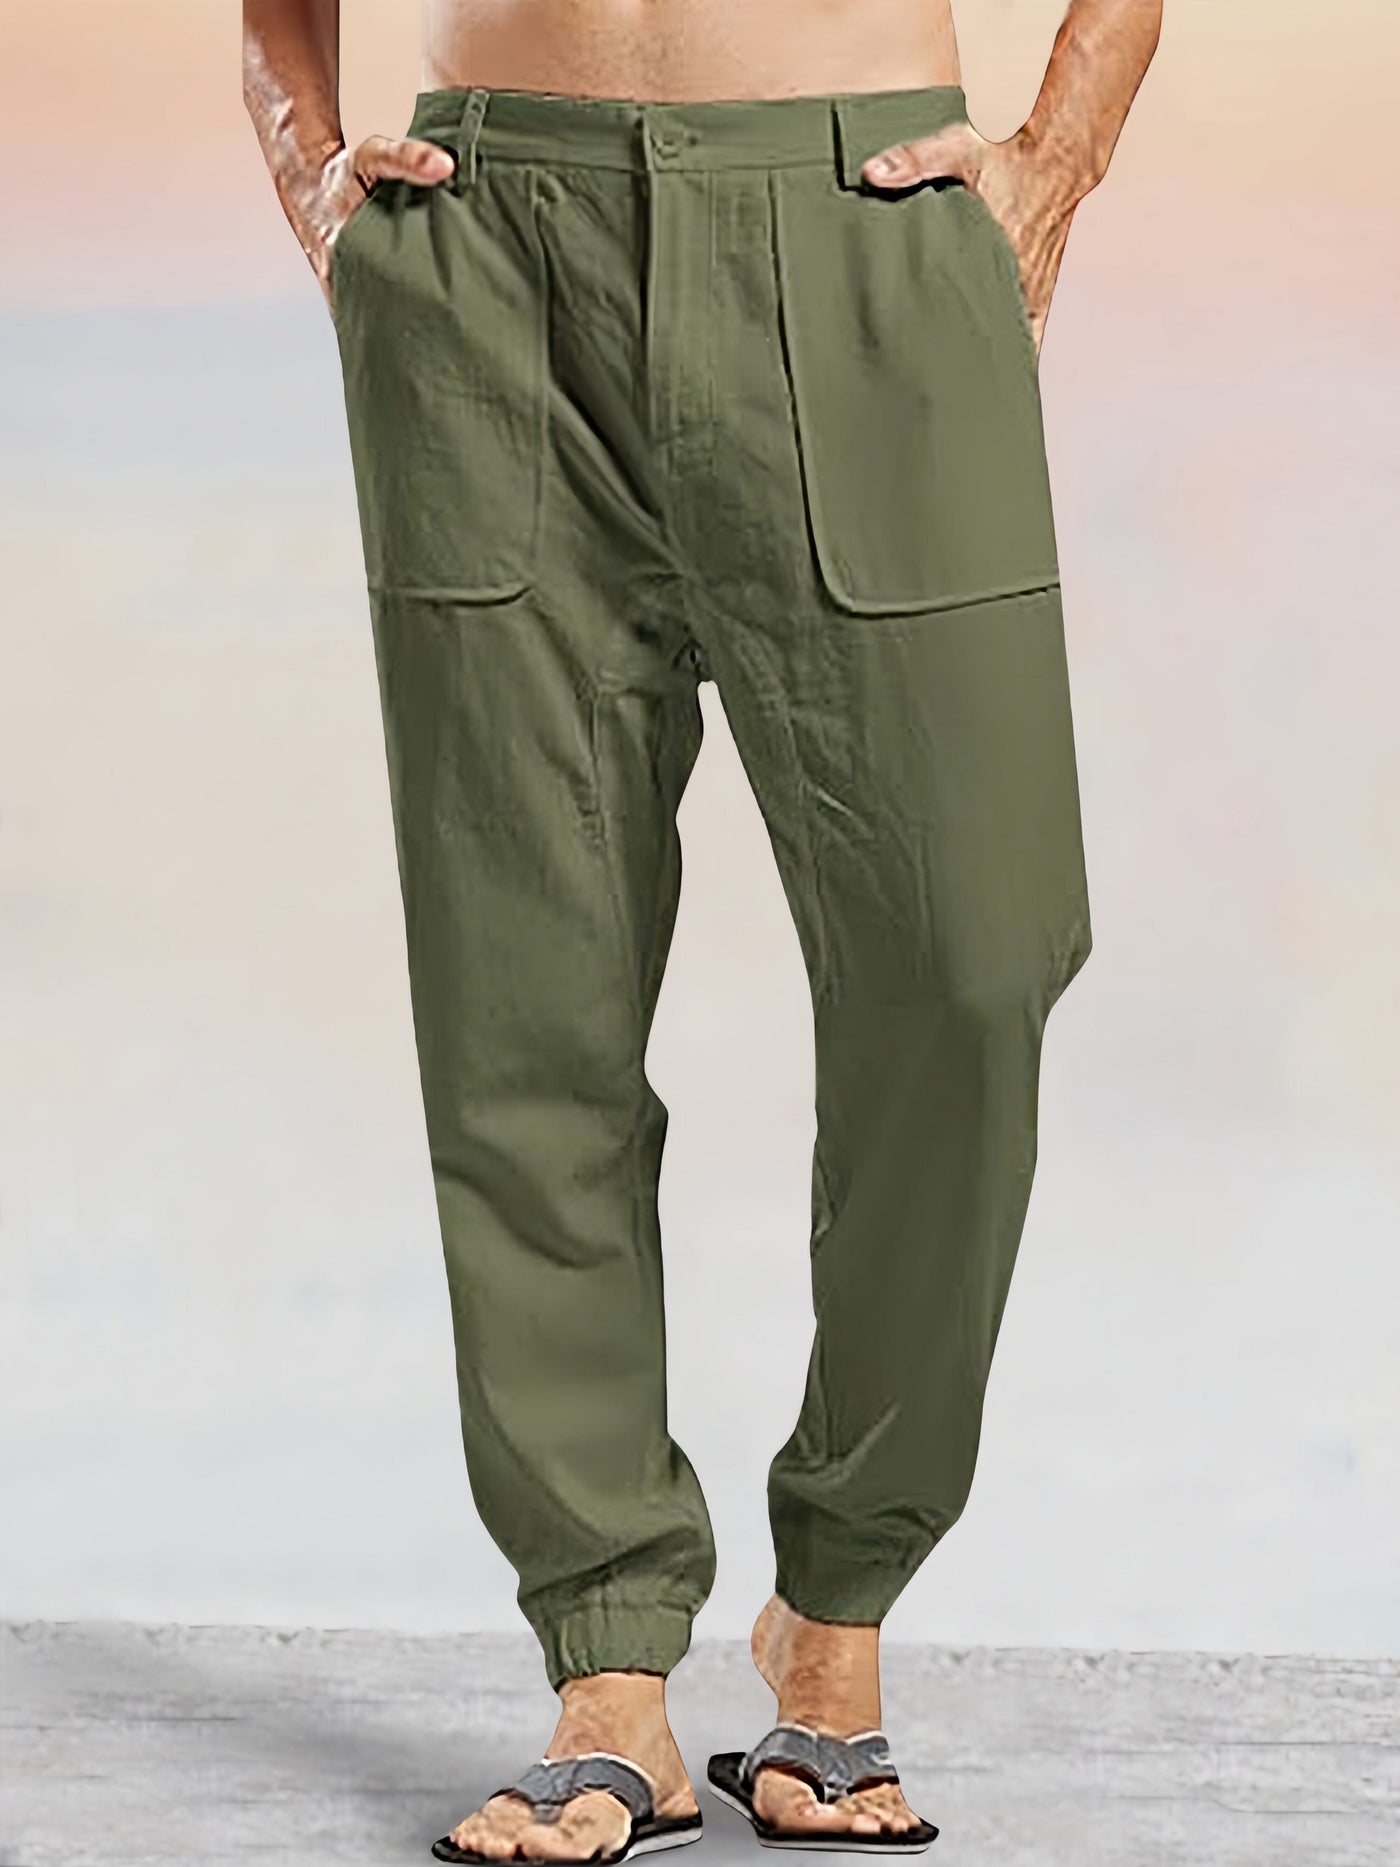 Casual Linen Style Pants With Pockets Pants coofandystore Army Green S 